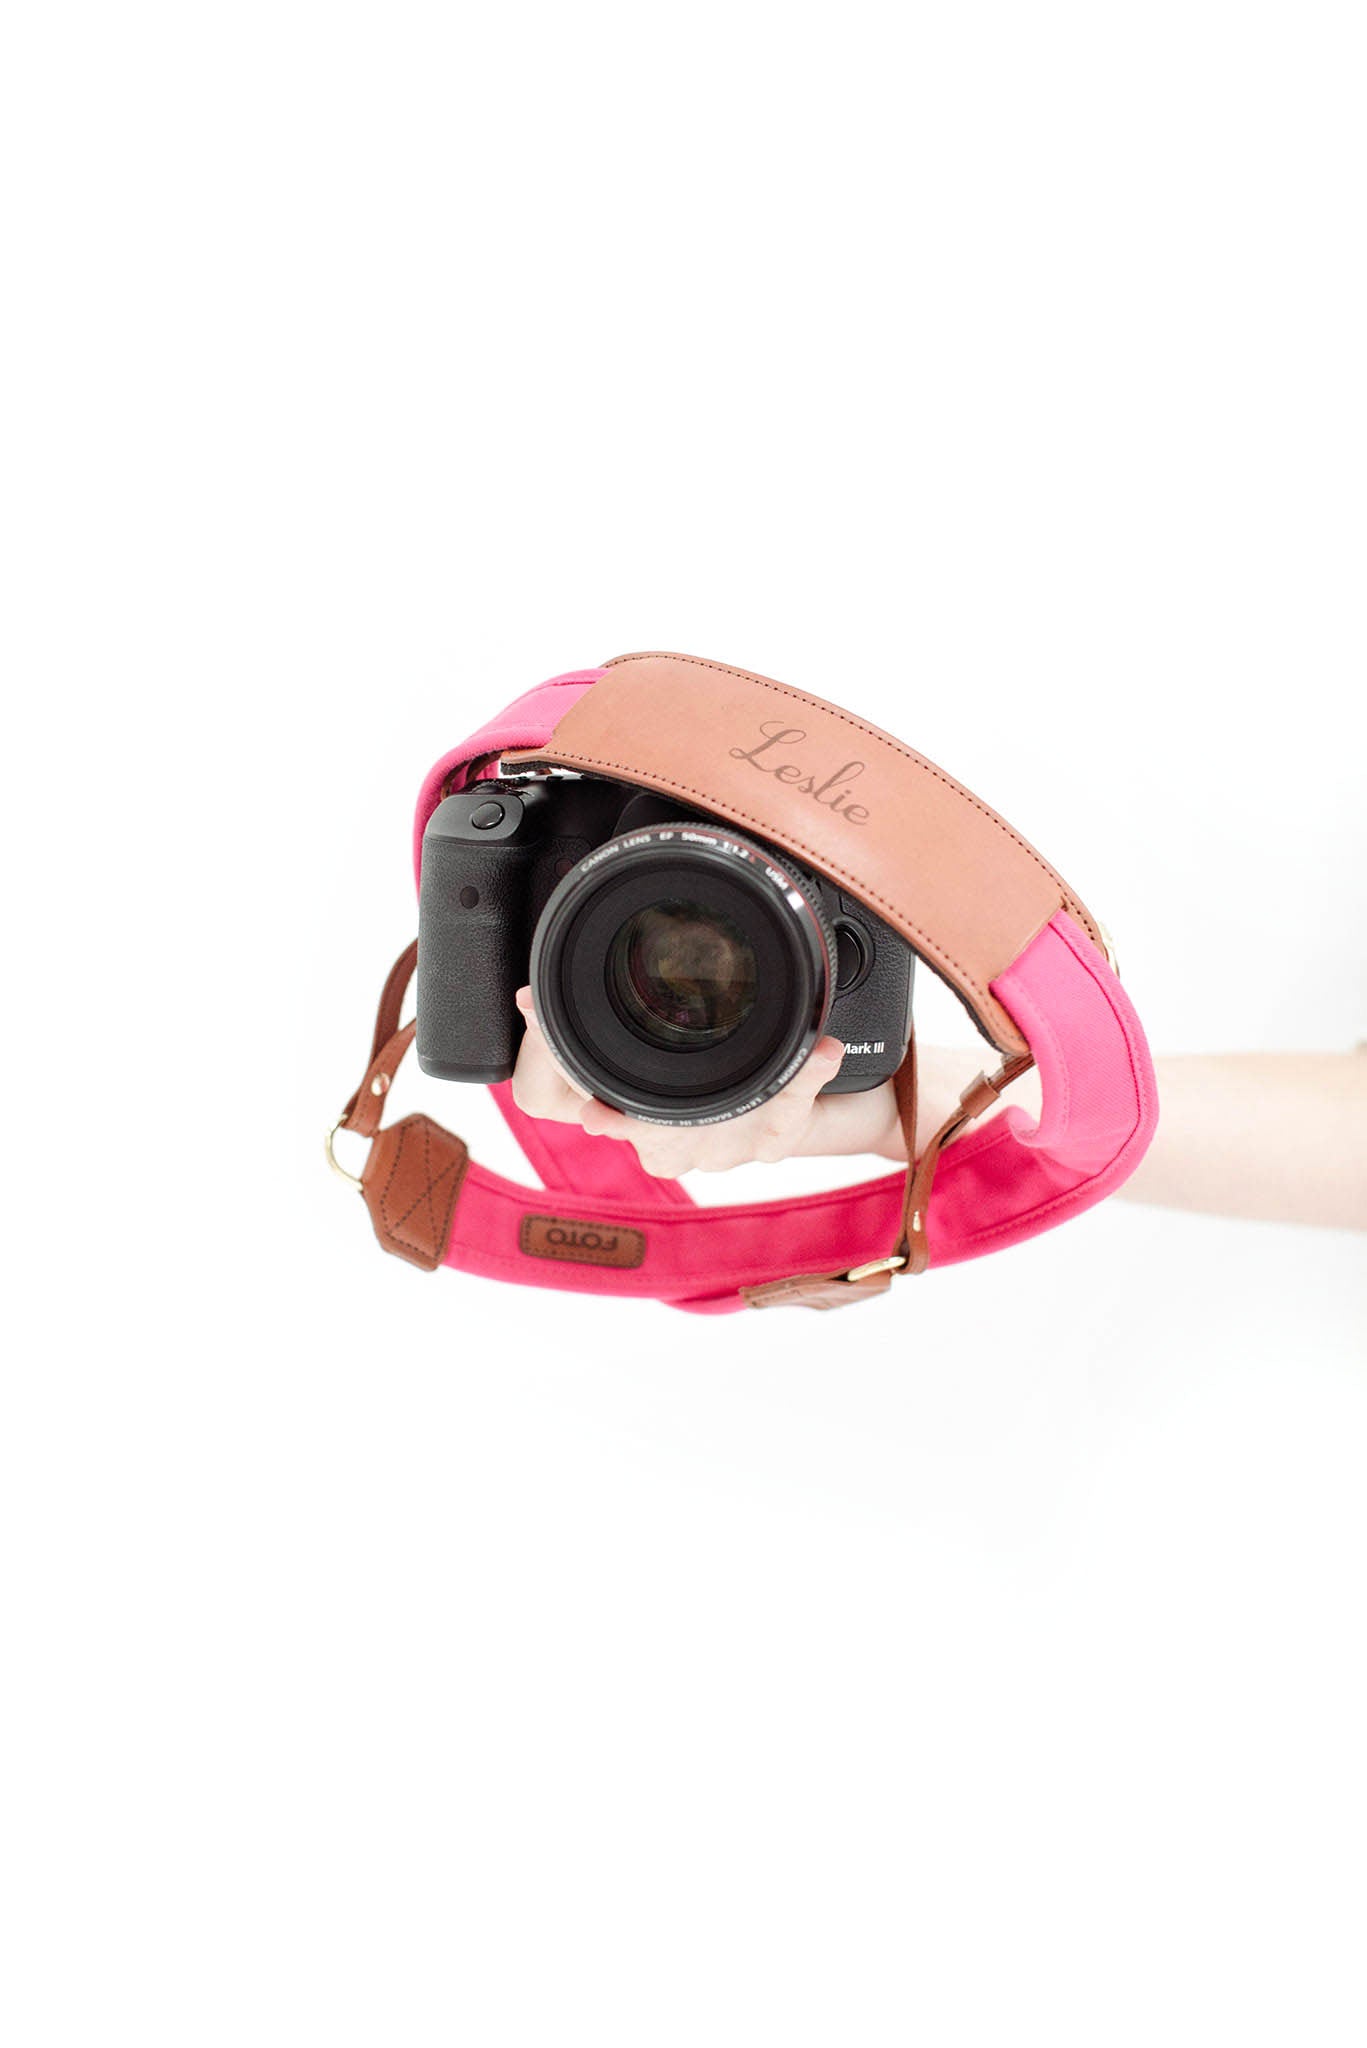 FOTO | Hibiscus Fotostrap - a hot pink canvas and genuine leather camera strap that can be personalized with a monogram or business logo, making it the perfect personalized gift! 